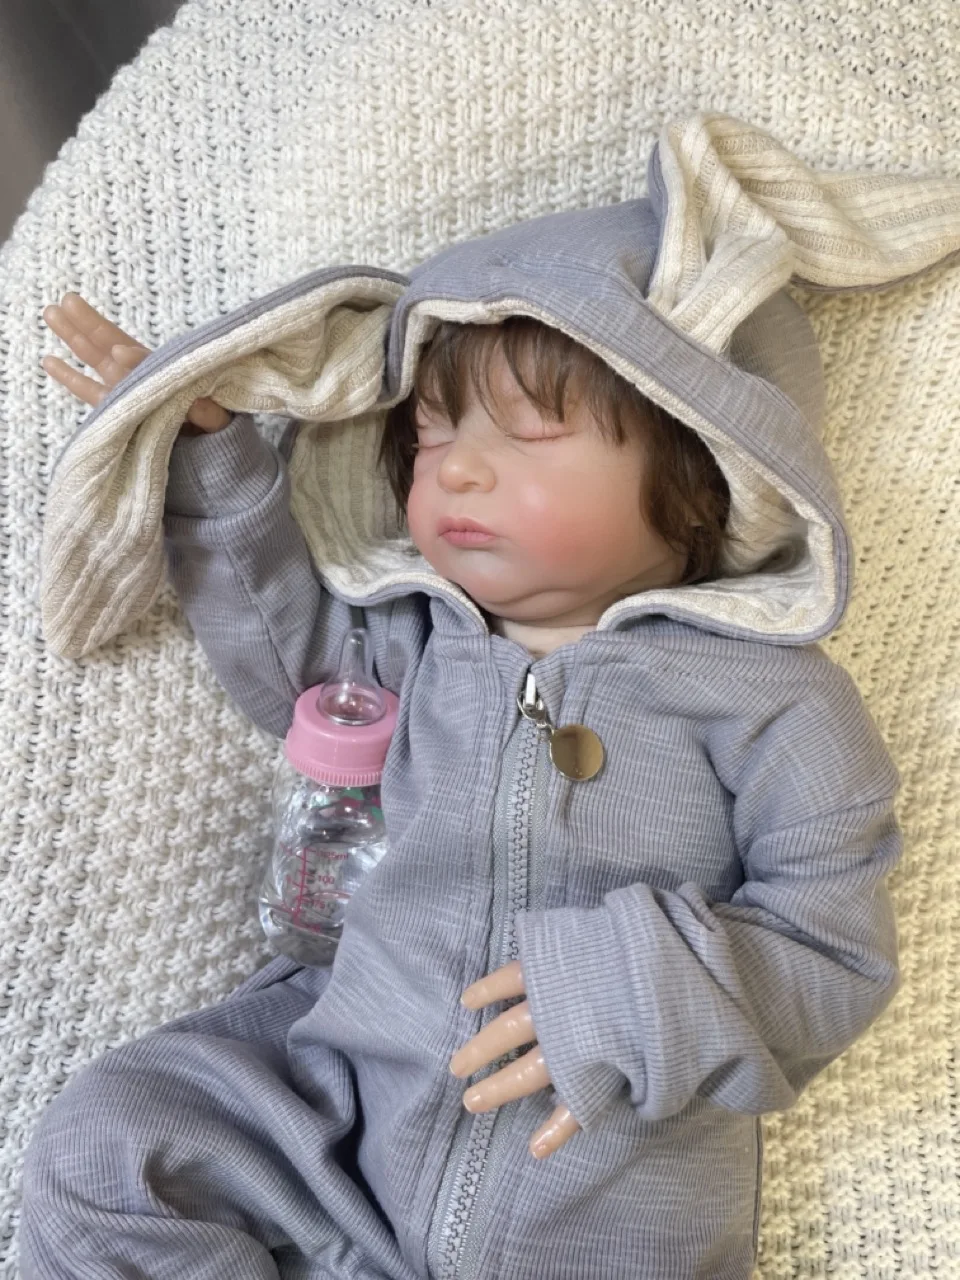 

52CM Lifelike Finished Reborn Baby Doll Laura Already Painted Handmade Implanted Hair Toy Dolls for Girls Birthday Gift